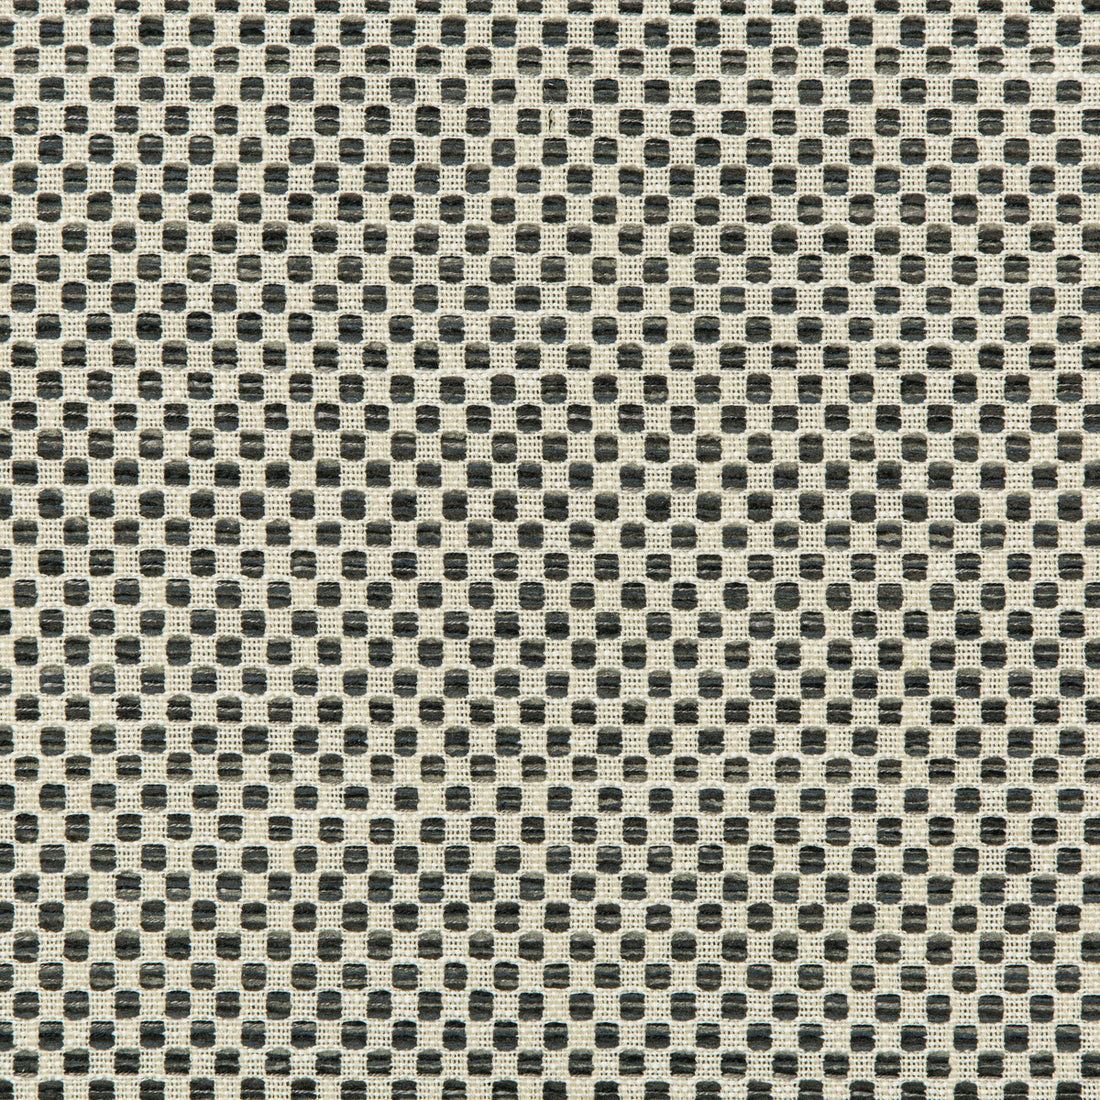 Kravet Design fabric in 36090-21 color - pattern 36090.21.0 - by Kravet Design in the Inside Out Performance Fabrics collection